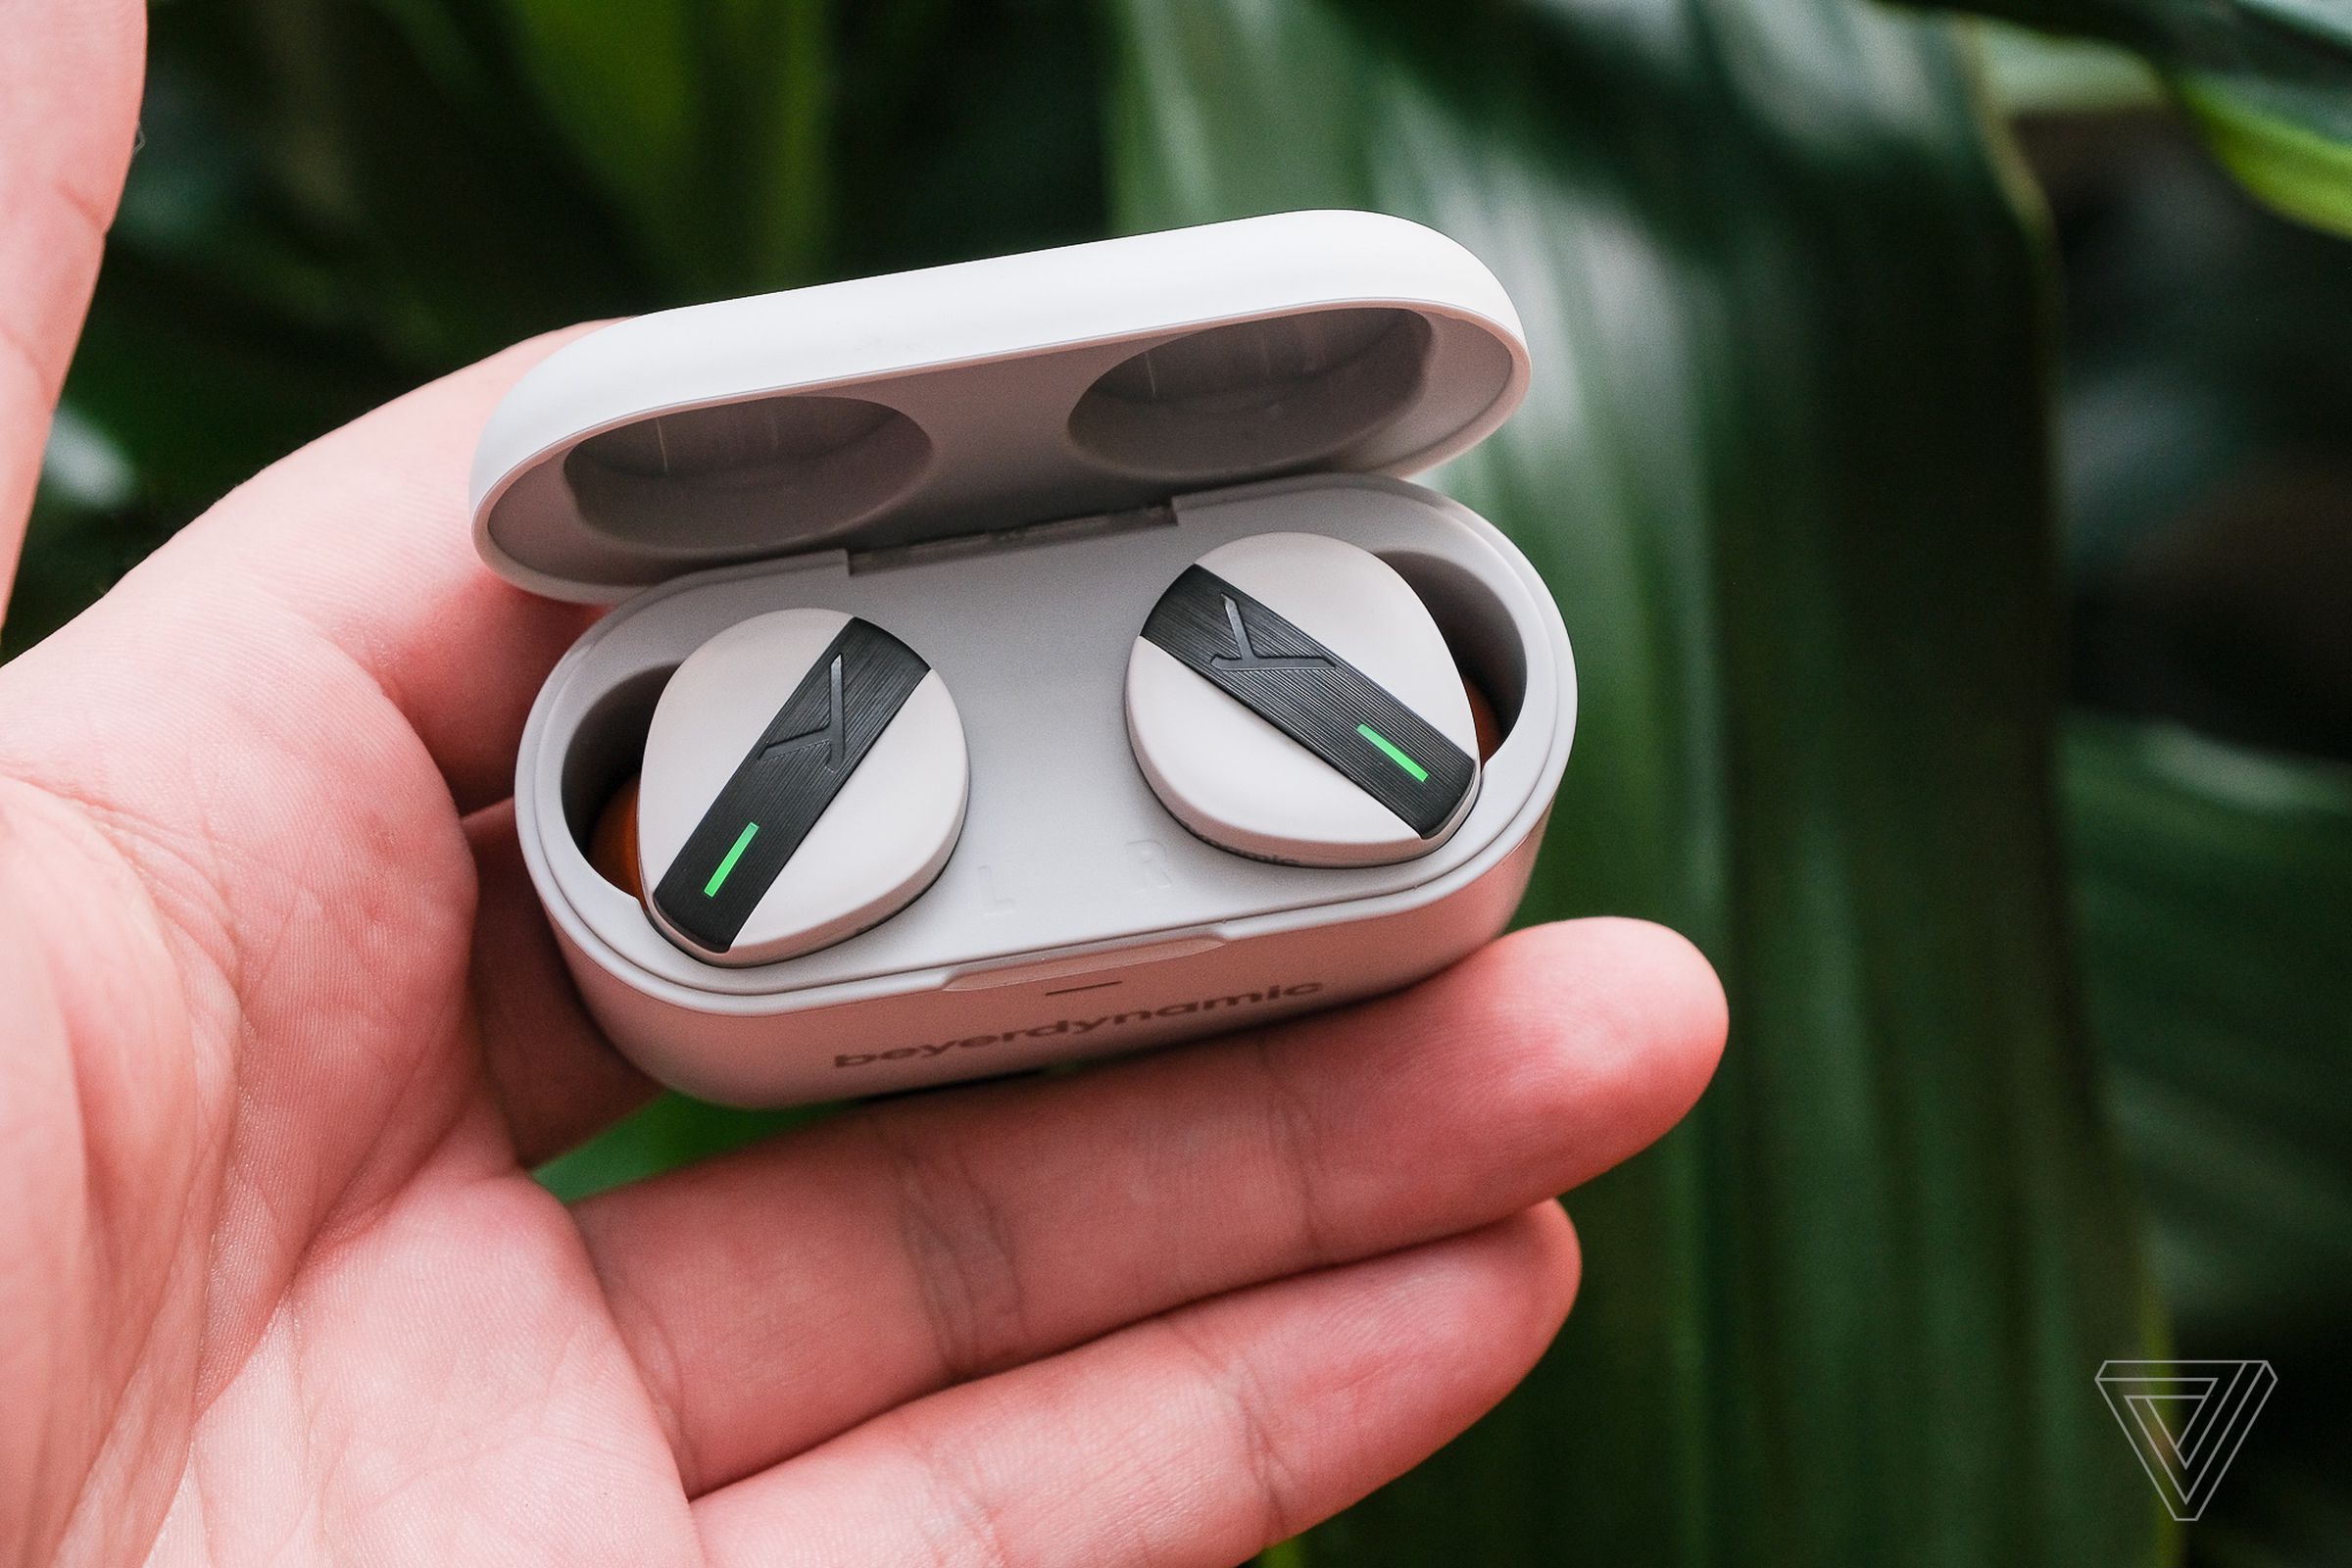 The earbuds can last for up to eight hours with noise cancellation enabled.